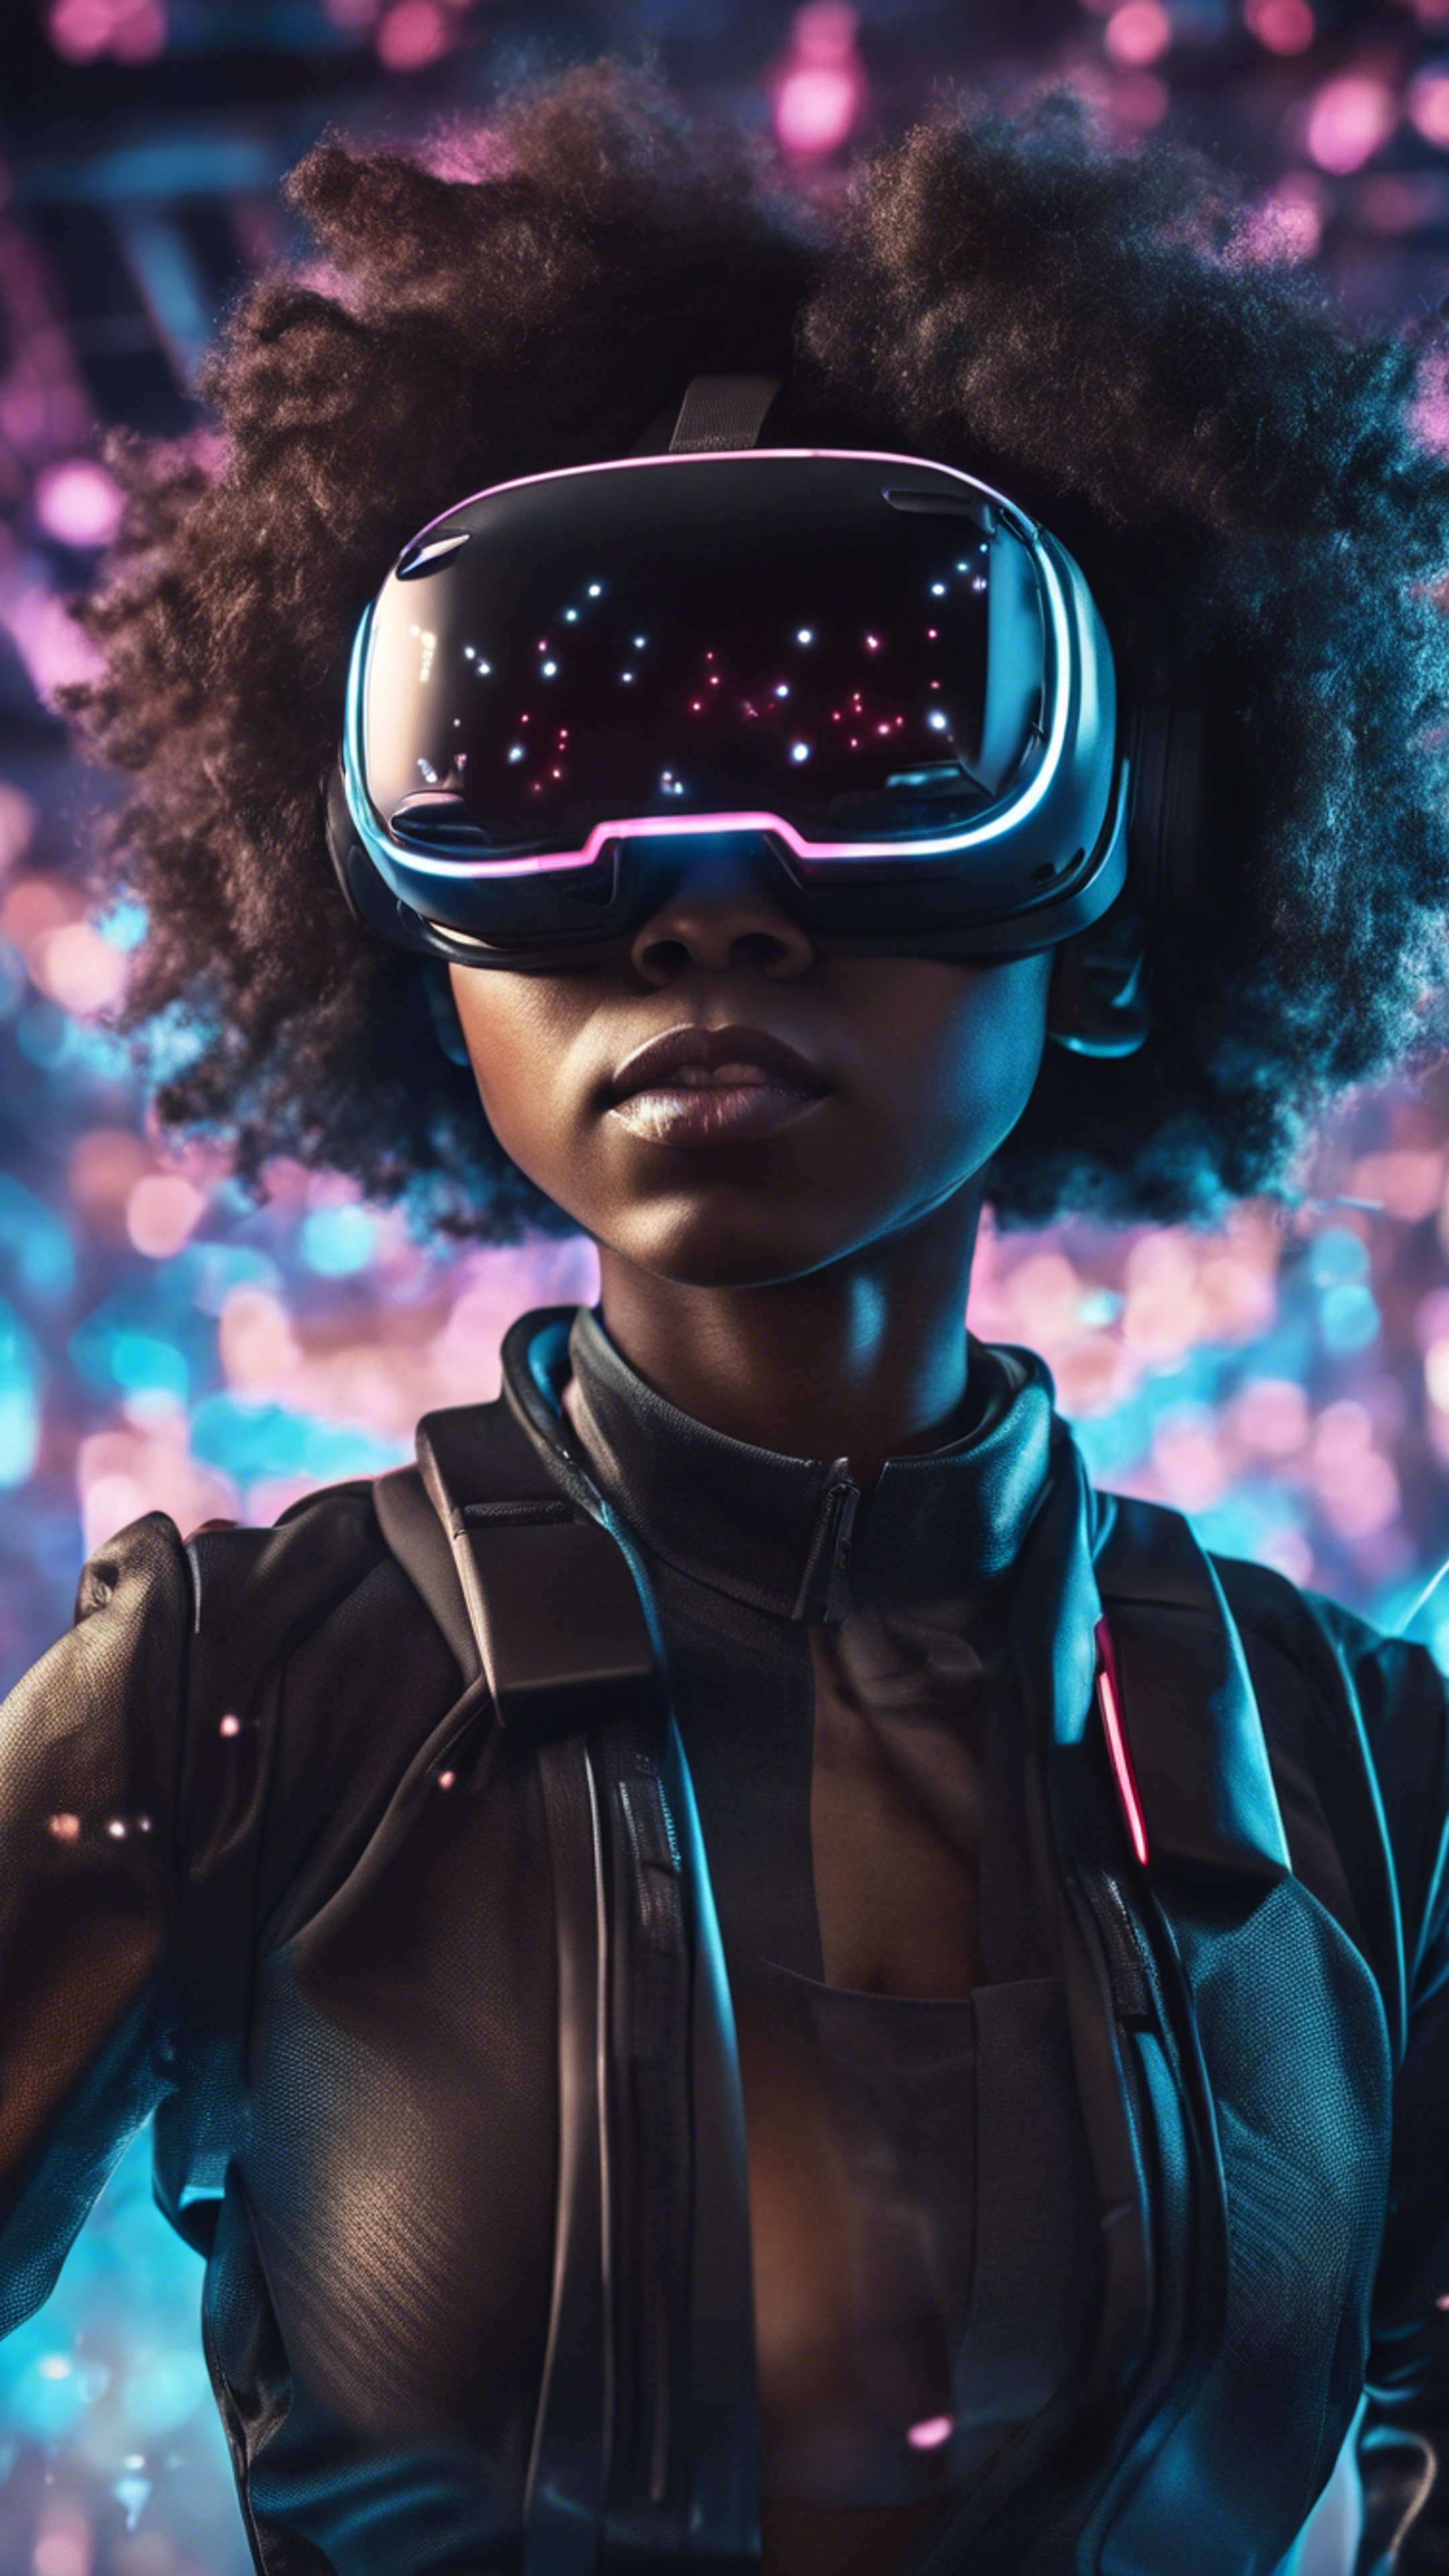 A black girl wearing a virtual reality headset completely immersed in a futuristic cyberspace. Tapeta[0f80f55163a8478e8707]